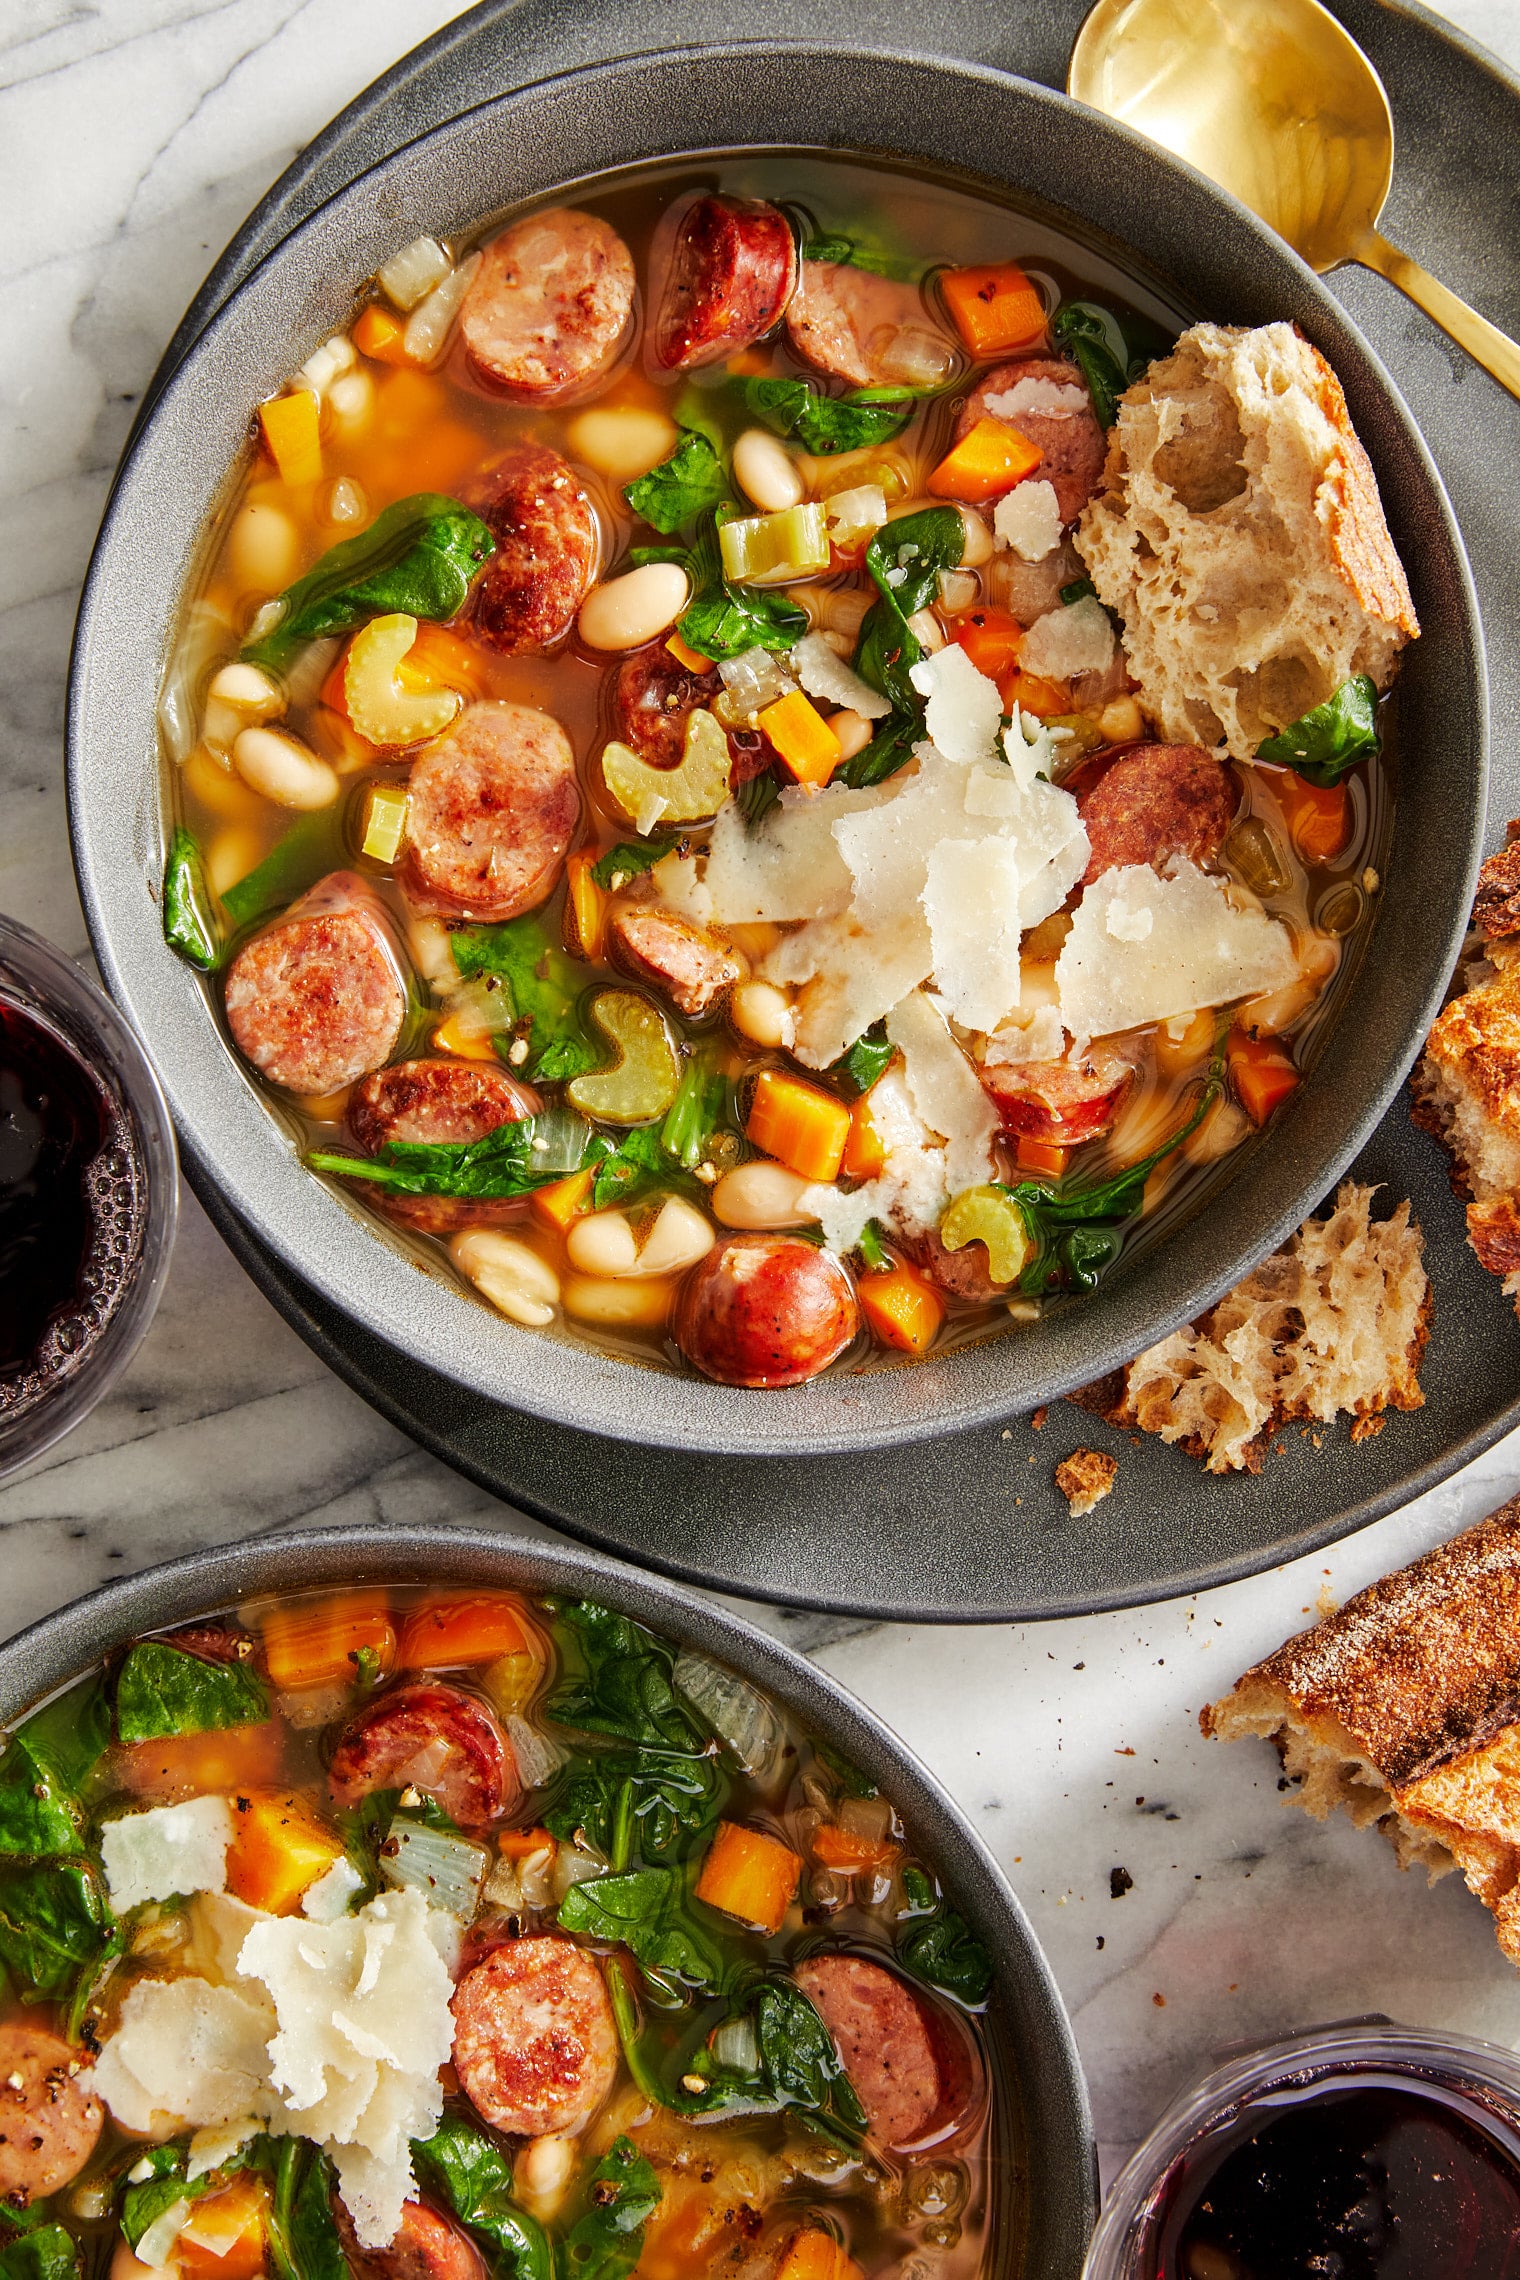 https://s23209.pcdn.co/wp-content/uploads/2015/03/121205_DD_Sausage-Spinach-Wh-Bean-Soup_128.jpg